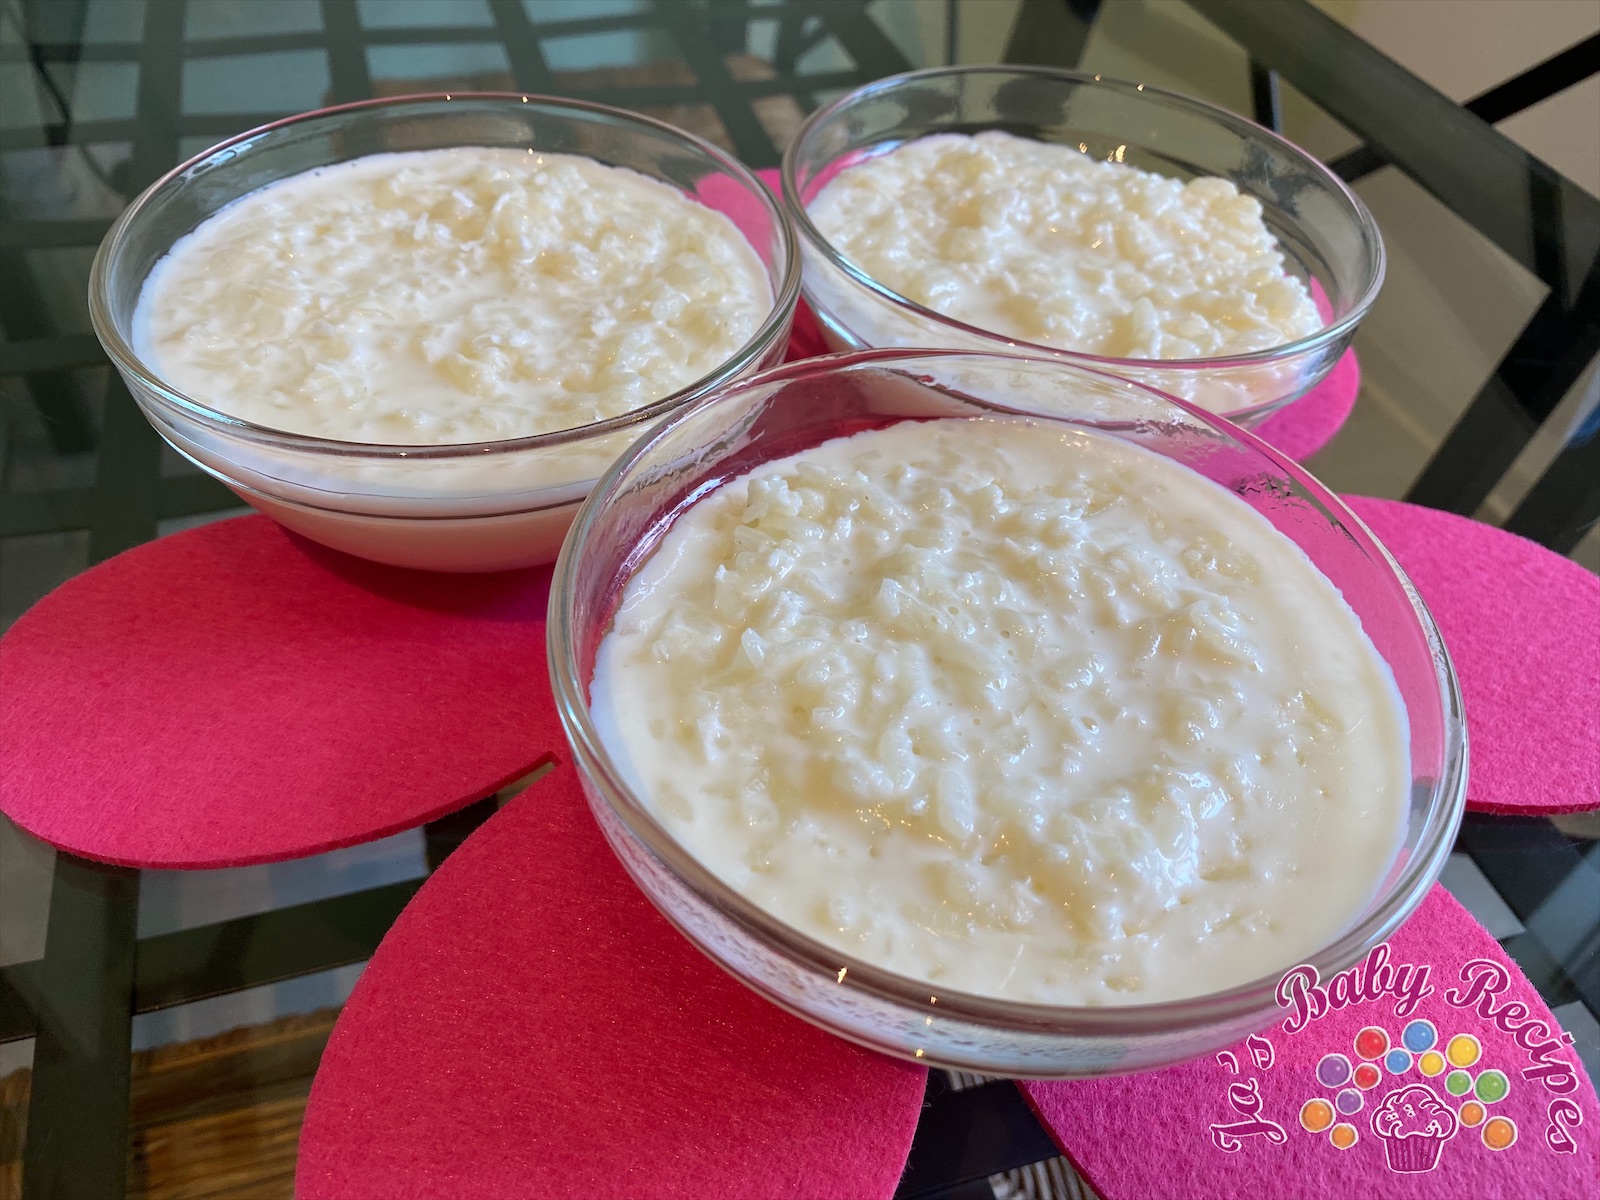 Baby friendly rice with milk and coconut flakes